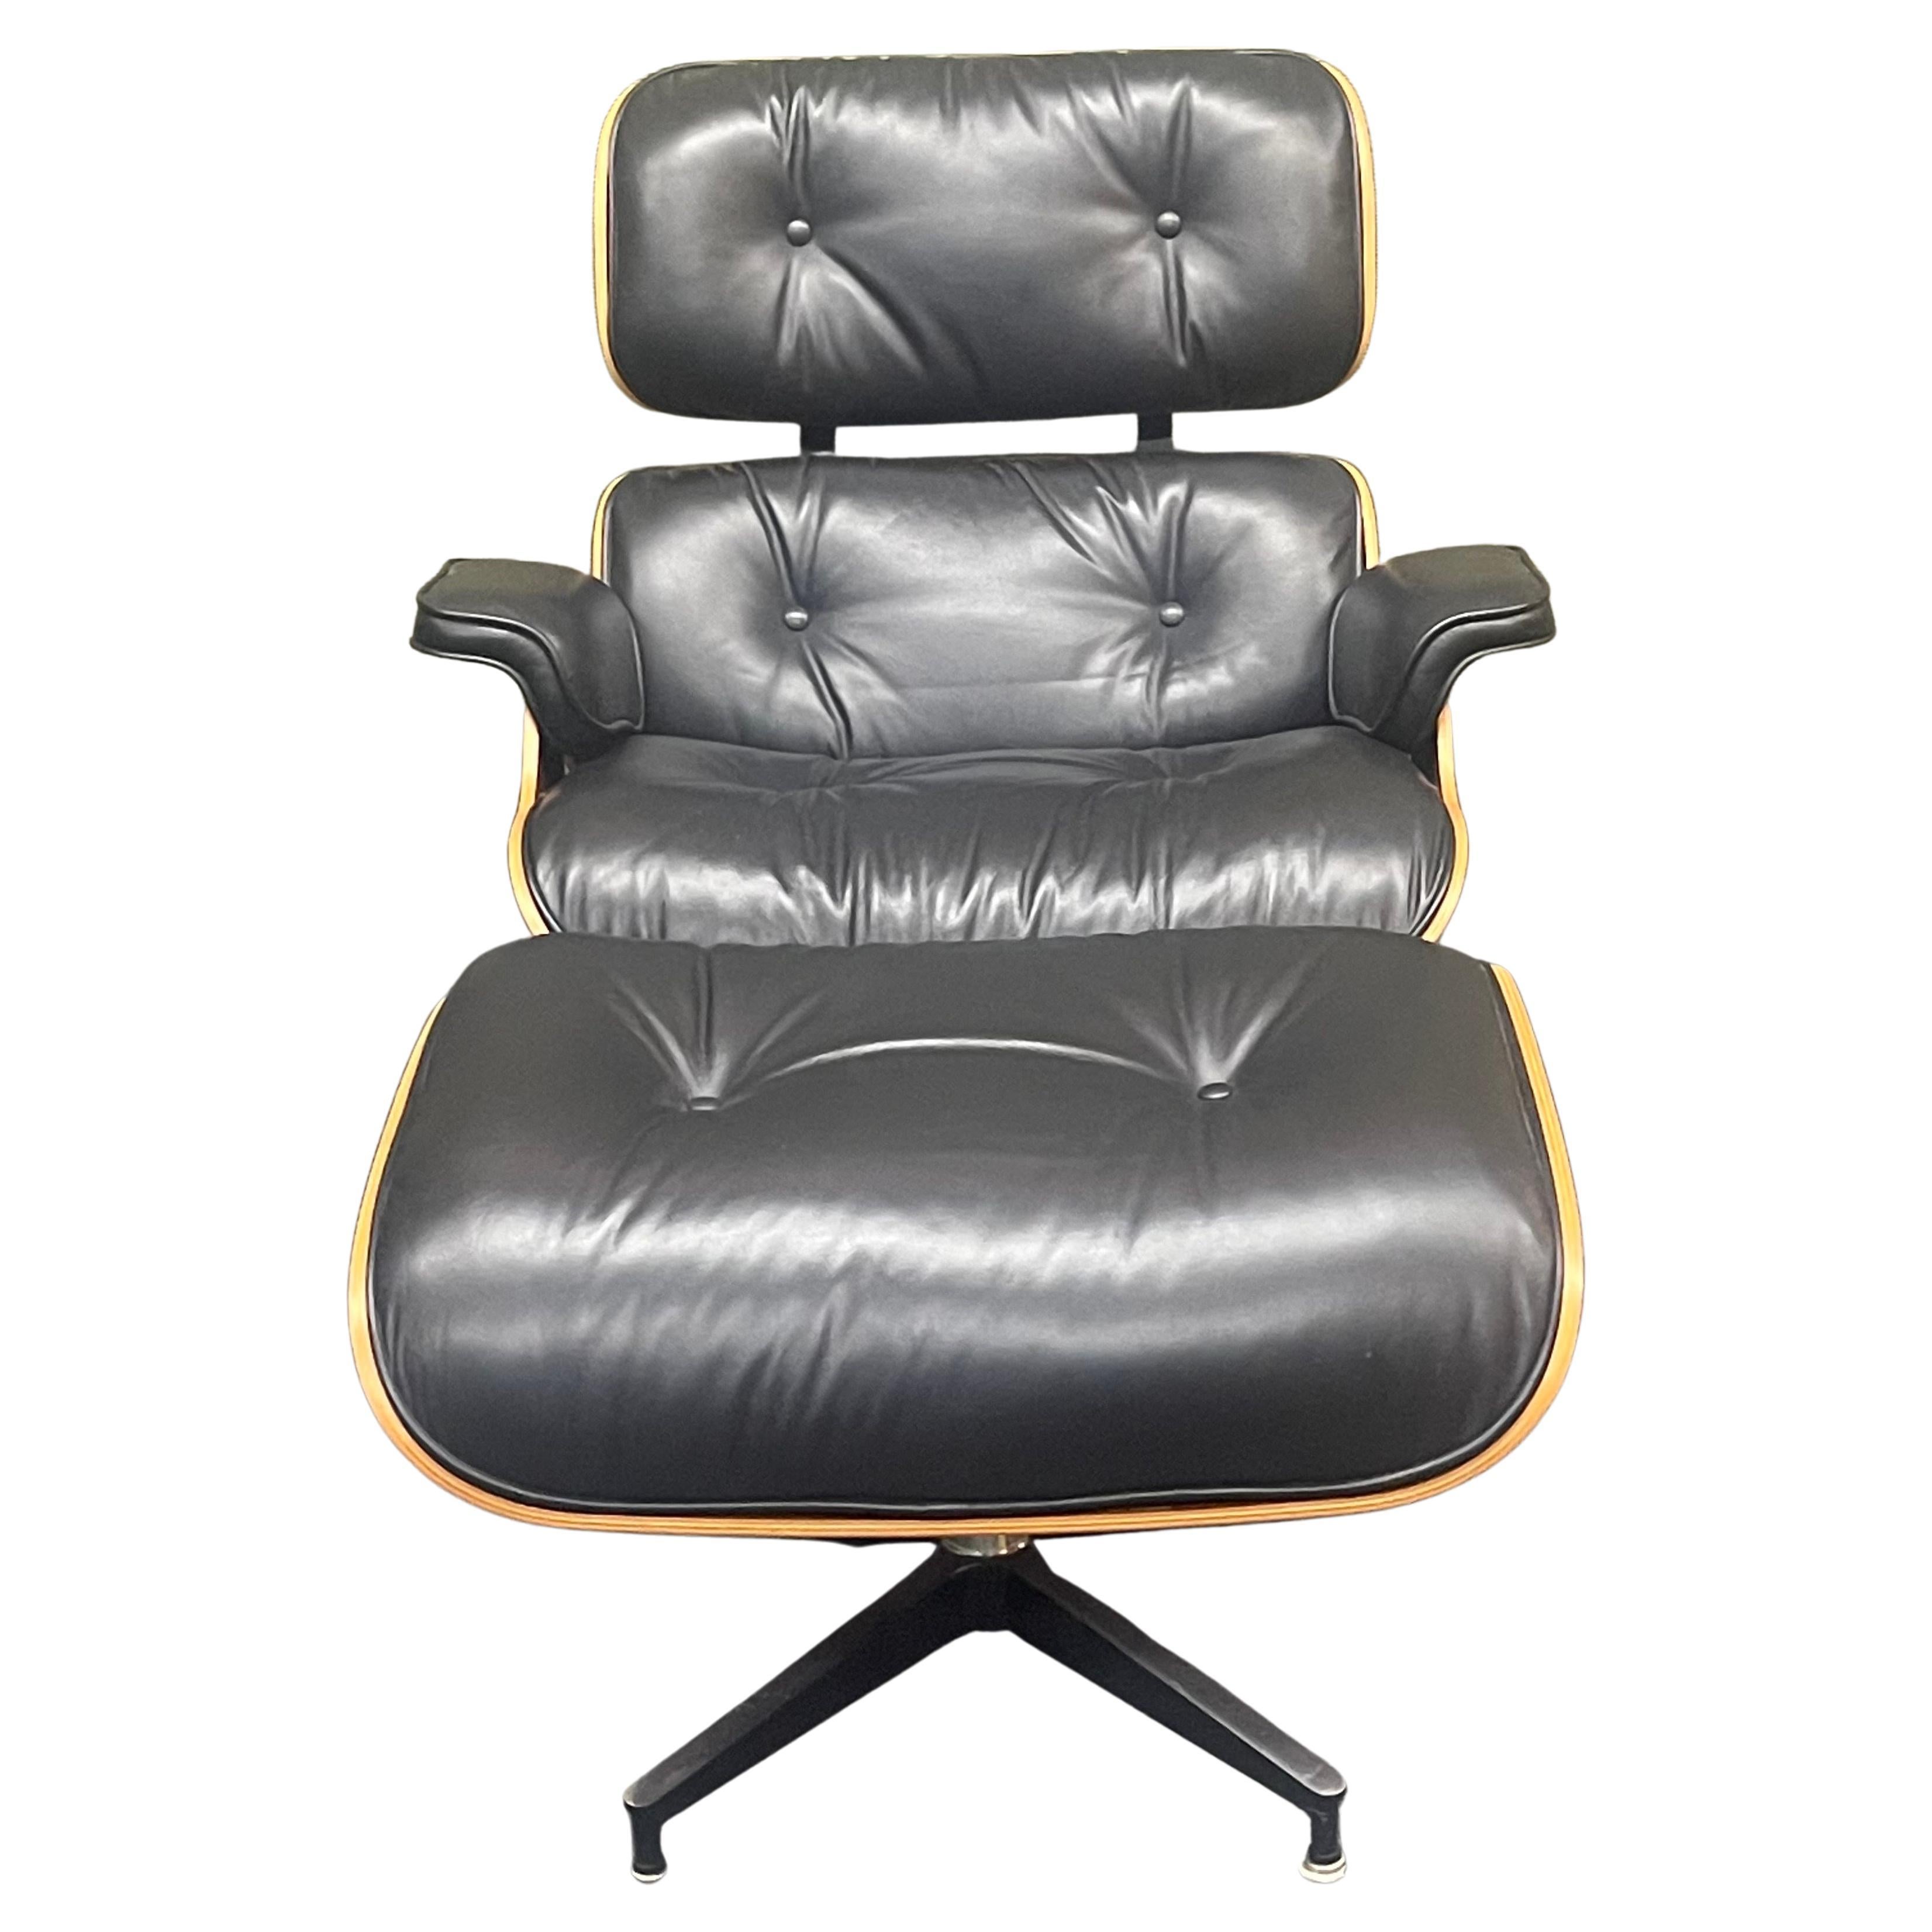 Authentic and iconic Herman Miller / Eames walnut and black leather lounge chair and ottoman (model's 670 & 671), circa 2004. The set are lightly worn and in condition (with the exception of a small scratch to the leather of the chairs seat. Please